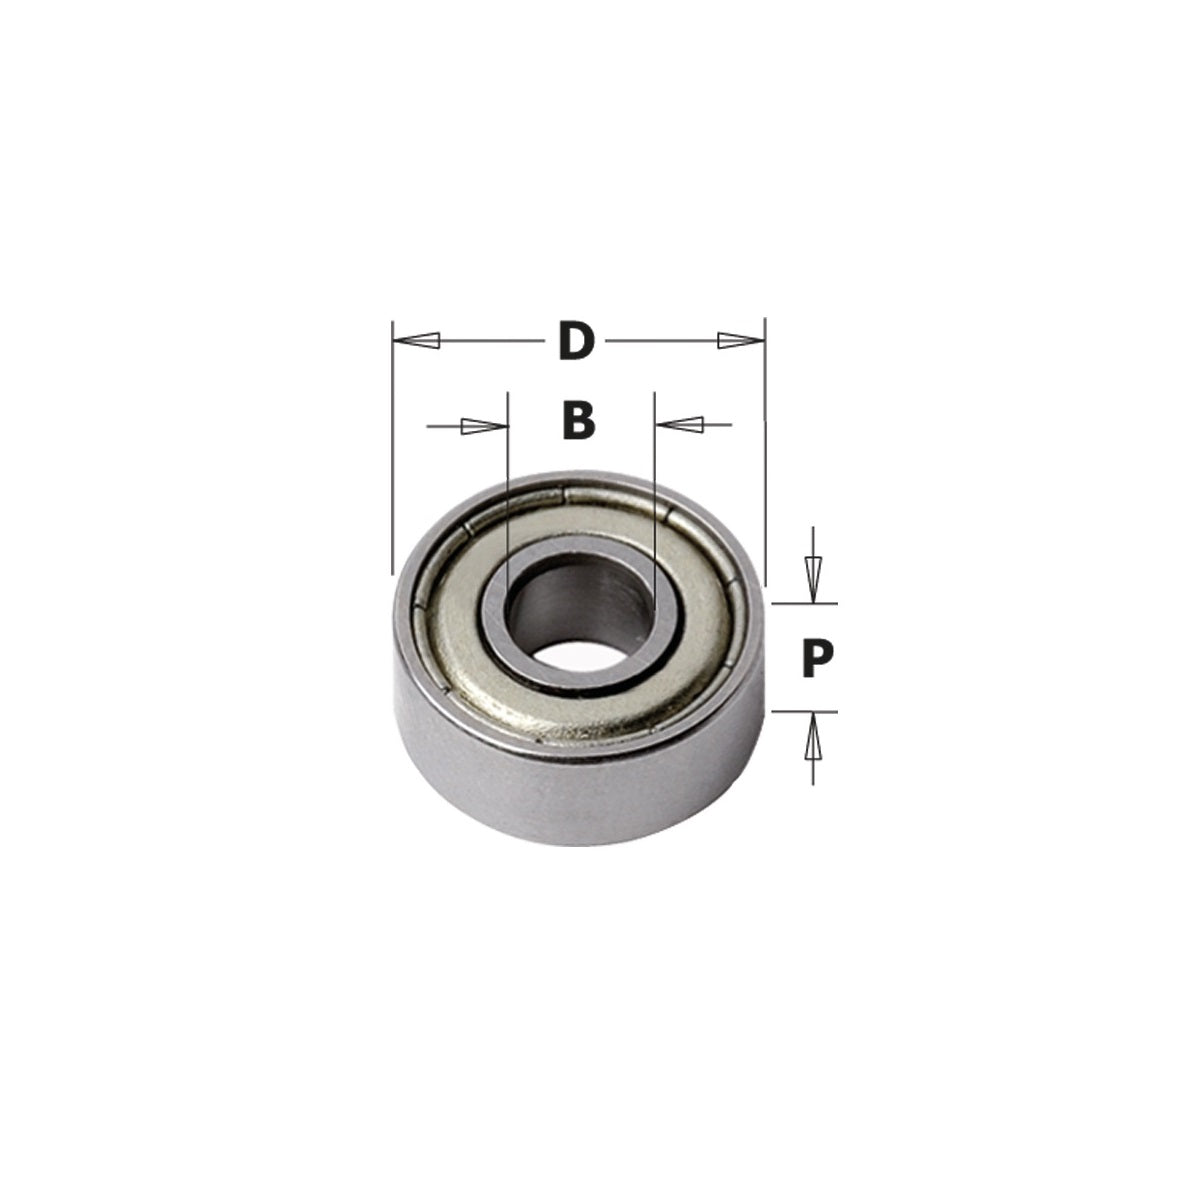 Replacement steel bearing for milling cutter, diameter 22 mm - CMT 791.005.00